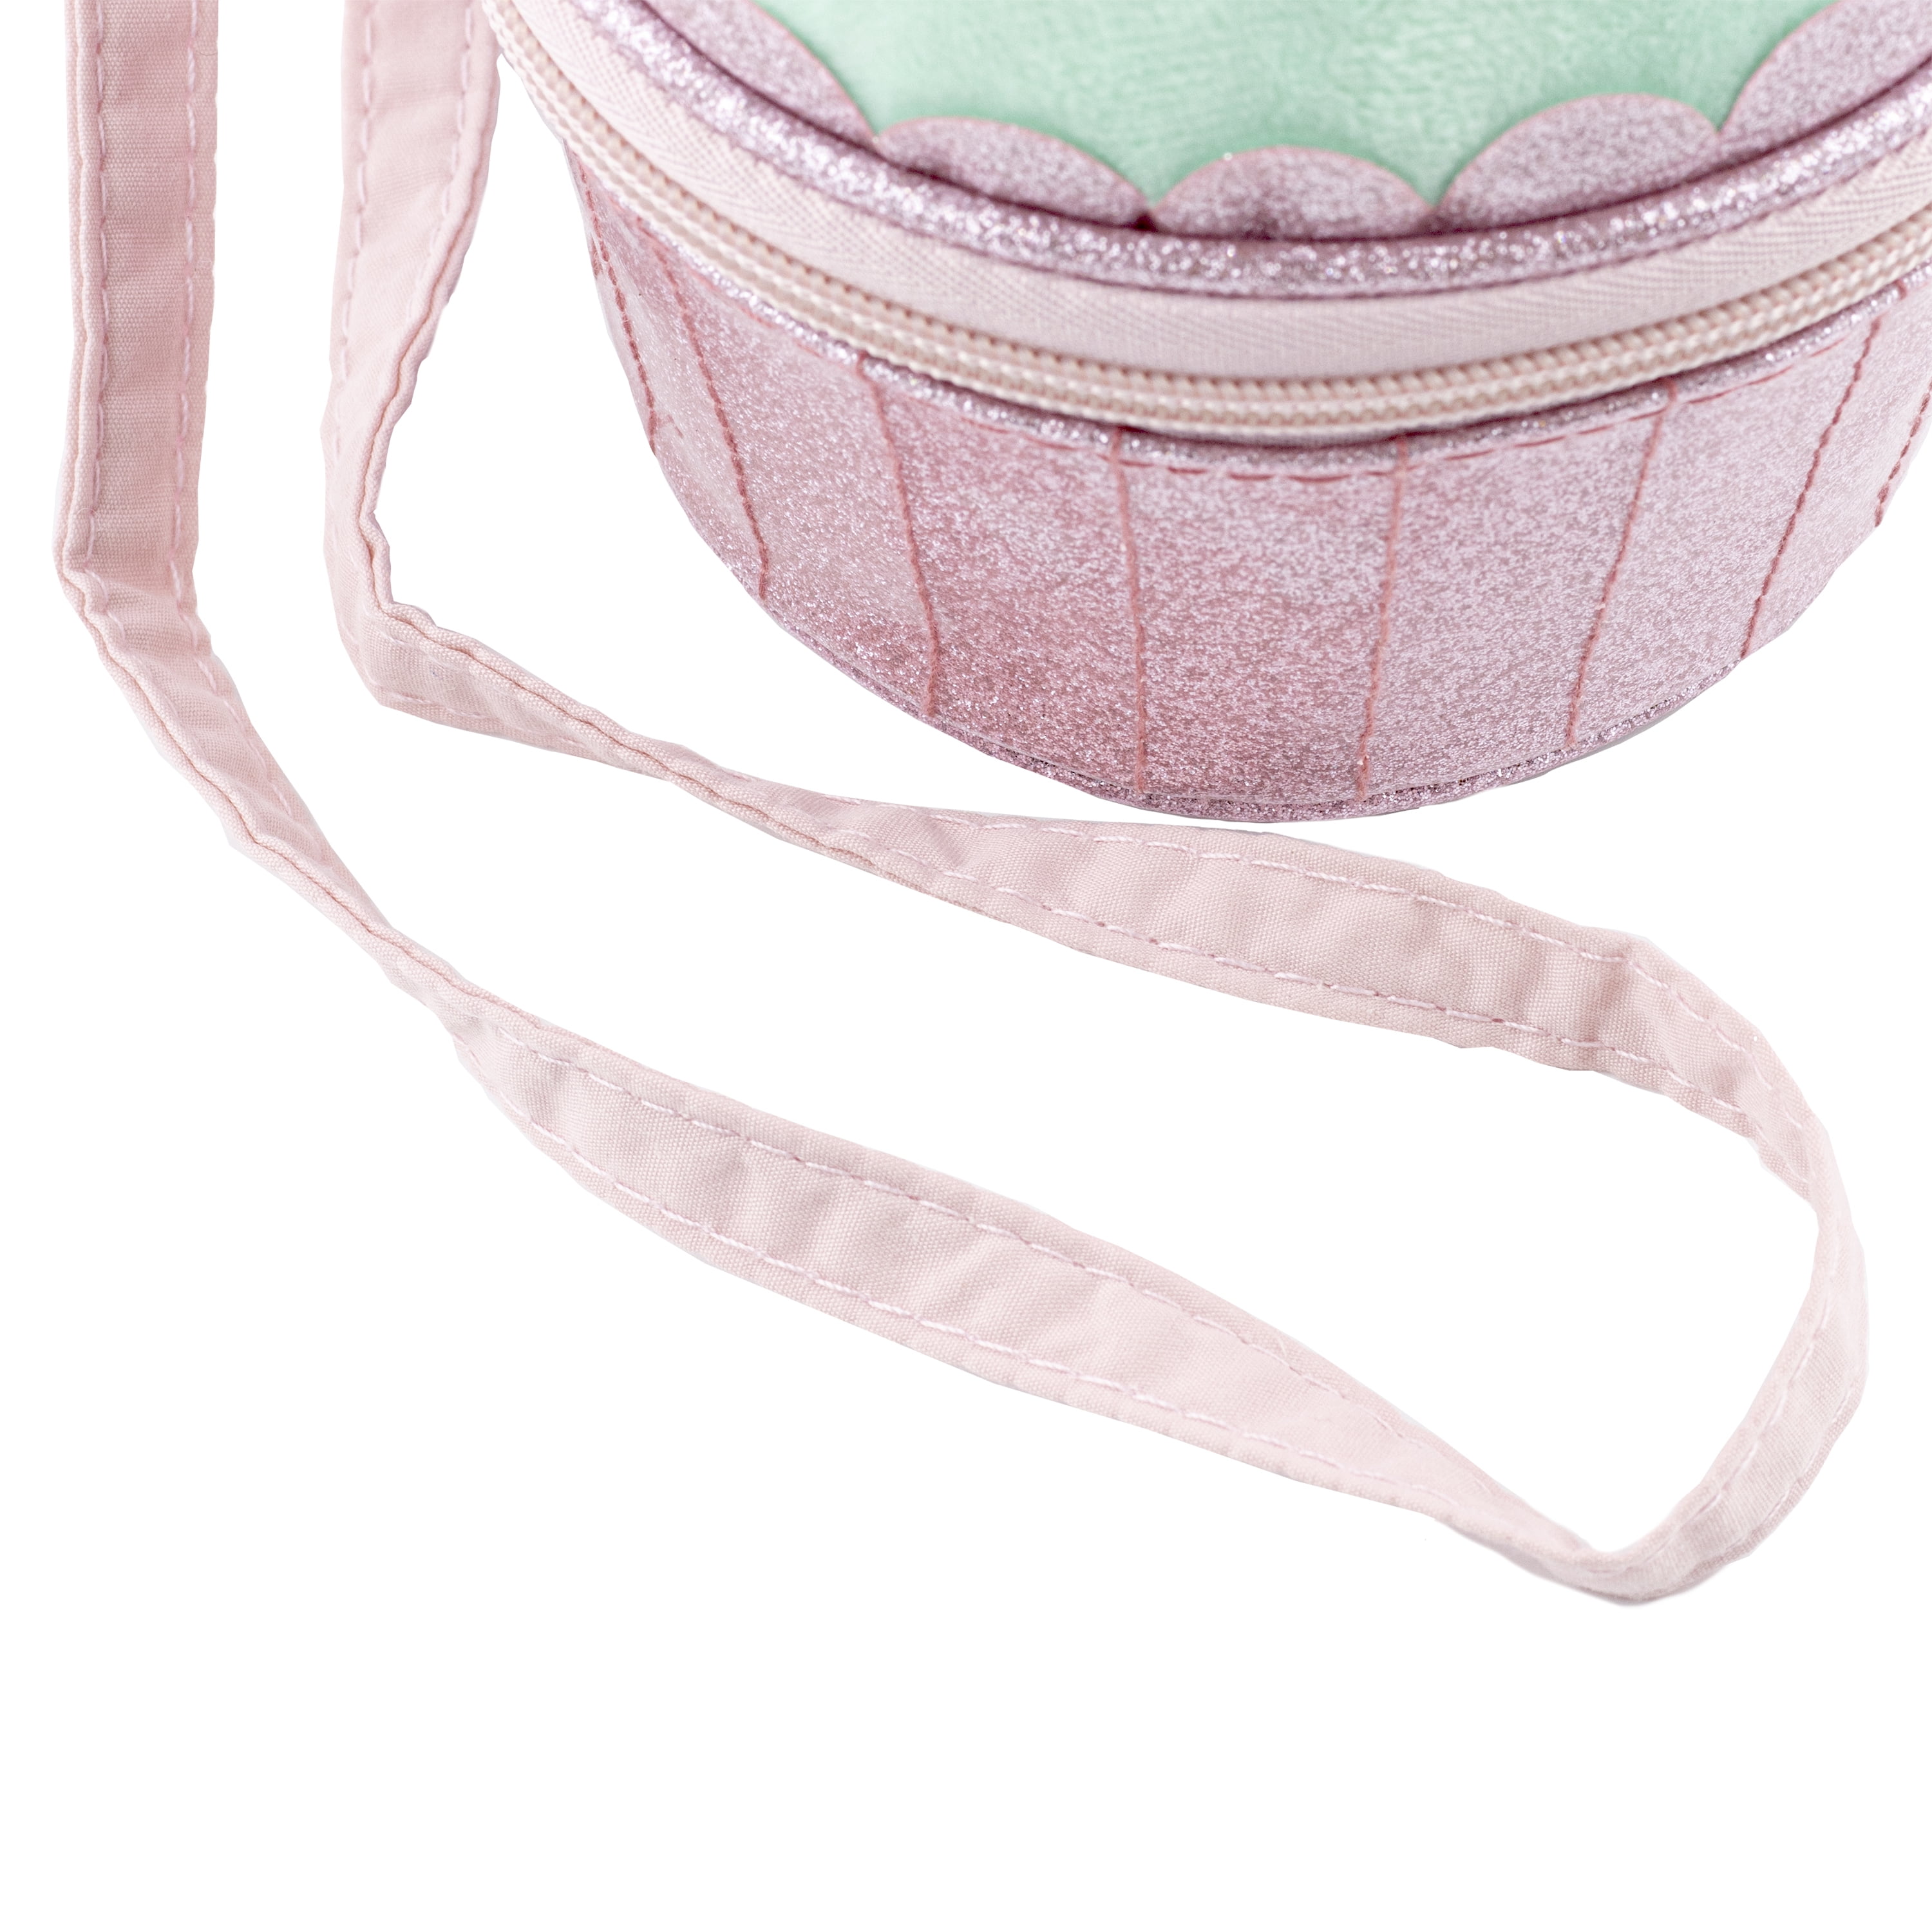 Sex and the City Cupcake Purse - All Things Cupcake